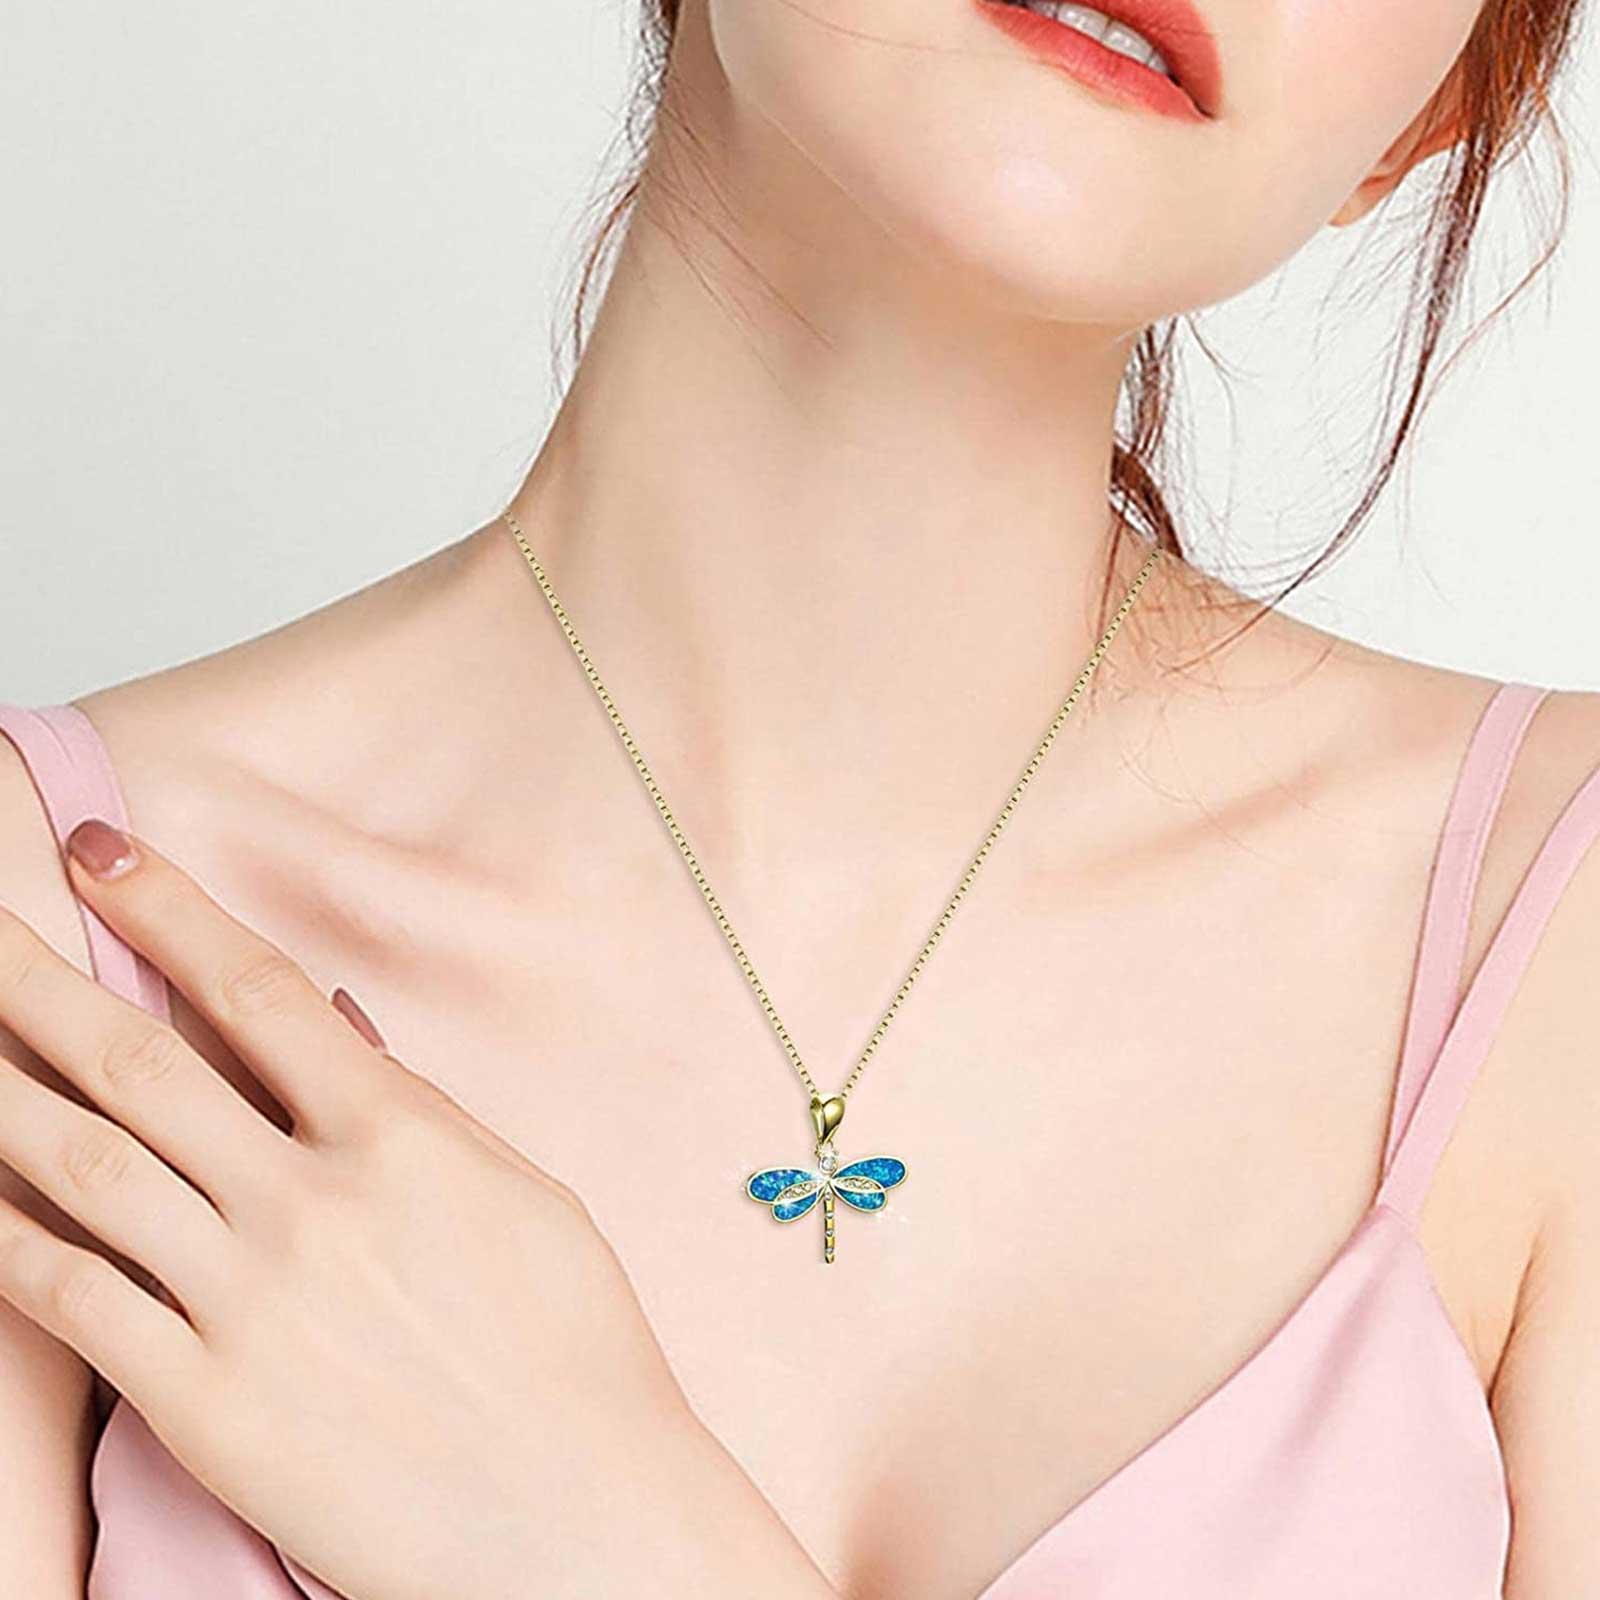 Dragonfly Necklace Pendant Choker For Women Girls Gold Silver White Blue Opal Z0T2 - image 2 of 9